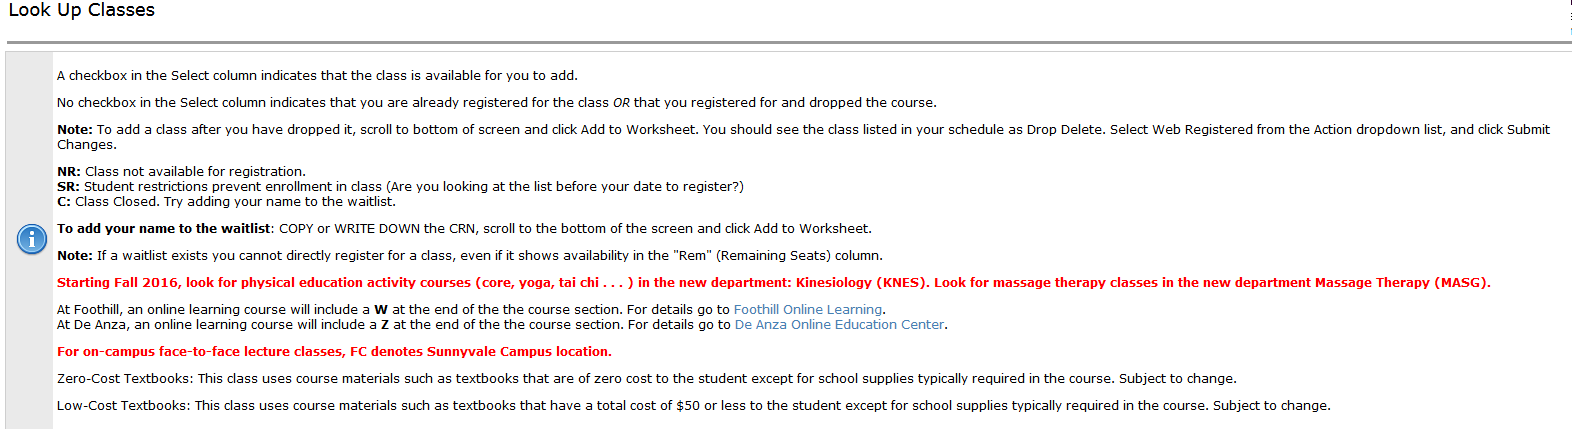 Description on how to look up classes